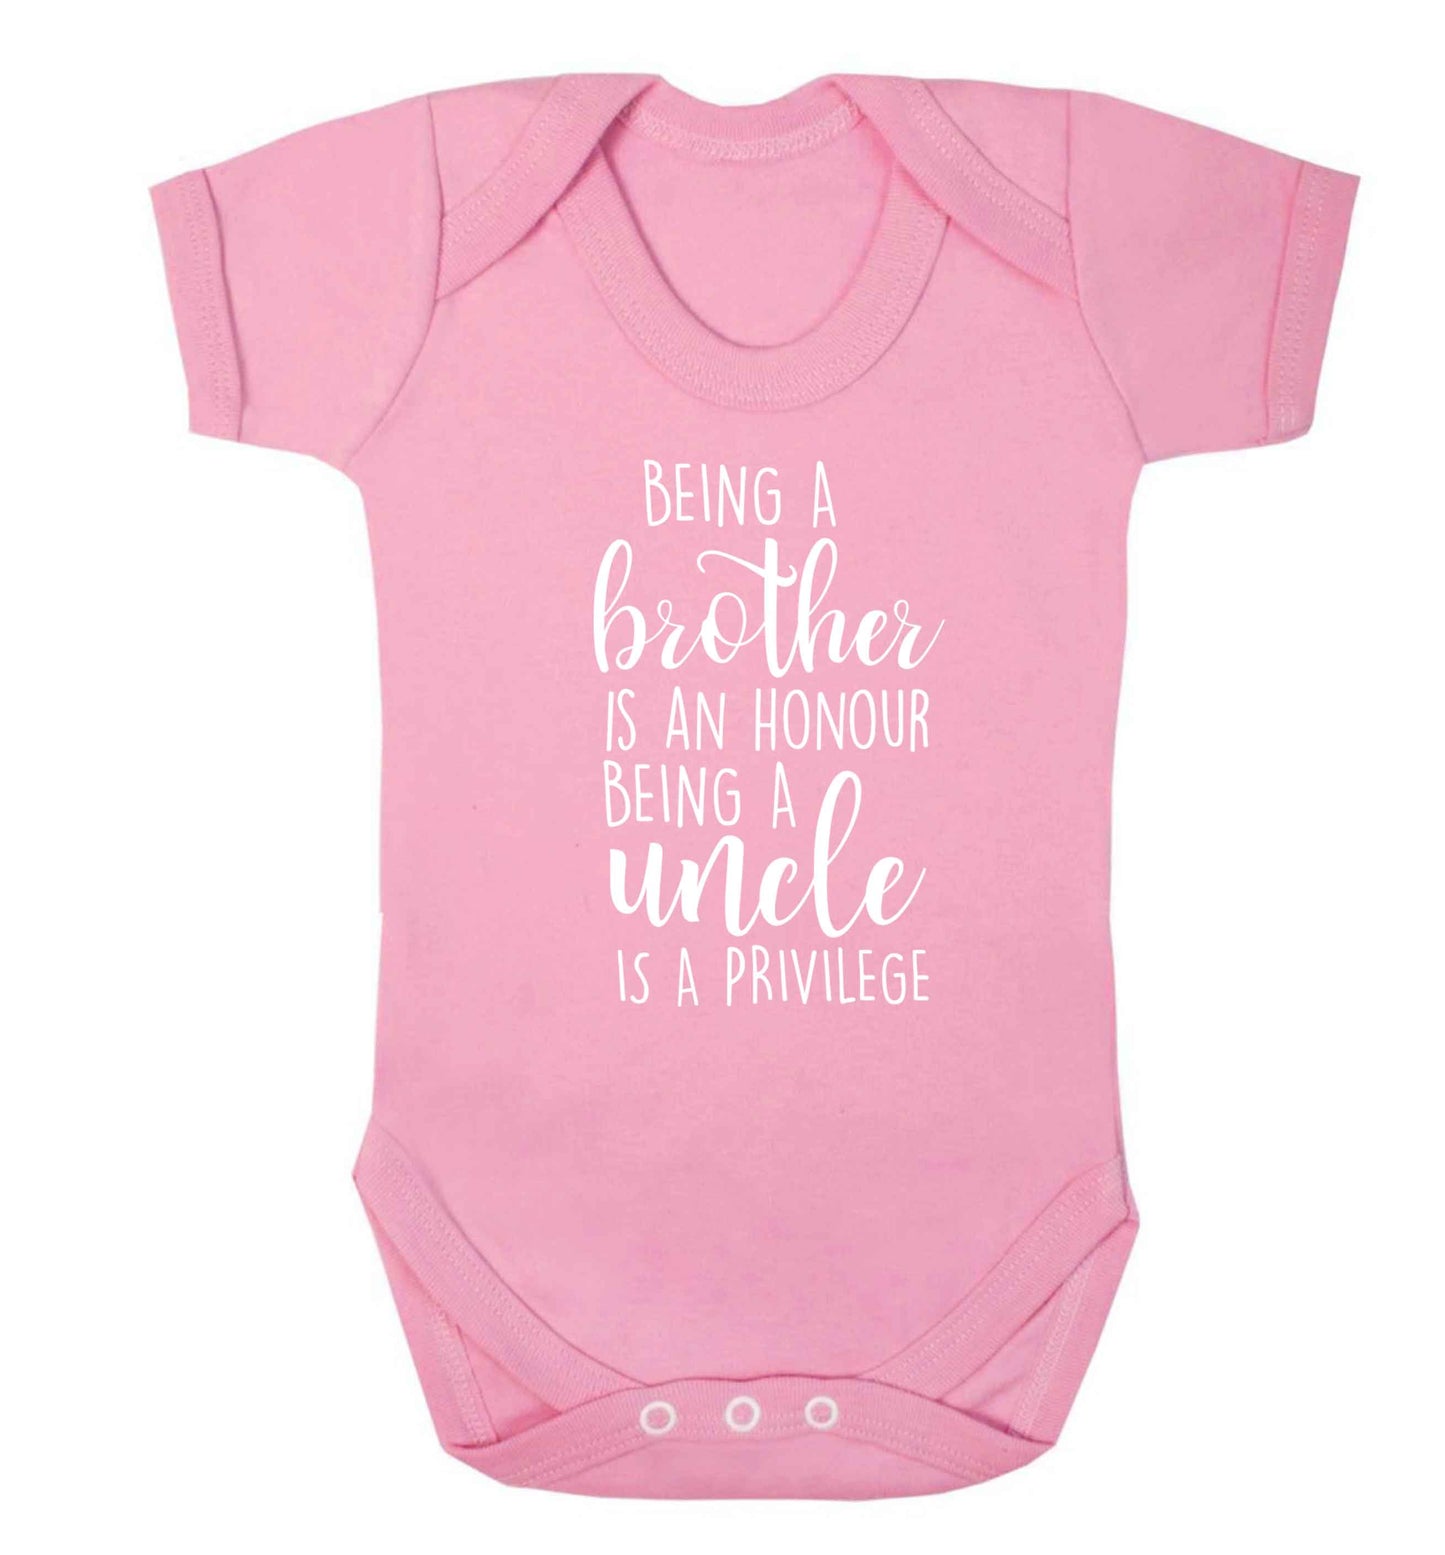 Being a brother is an honour being an uncle is a privilege Baby Vest pale pink 18-24 months